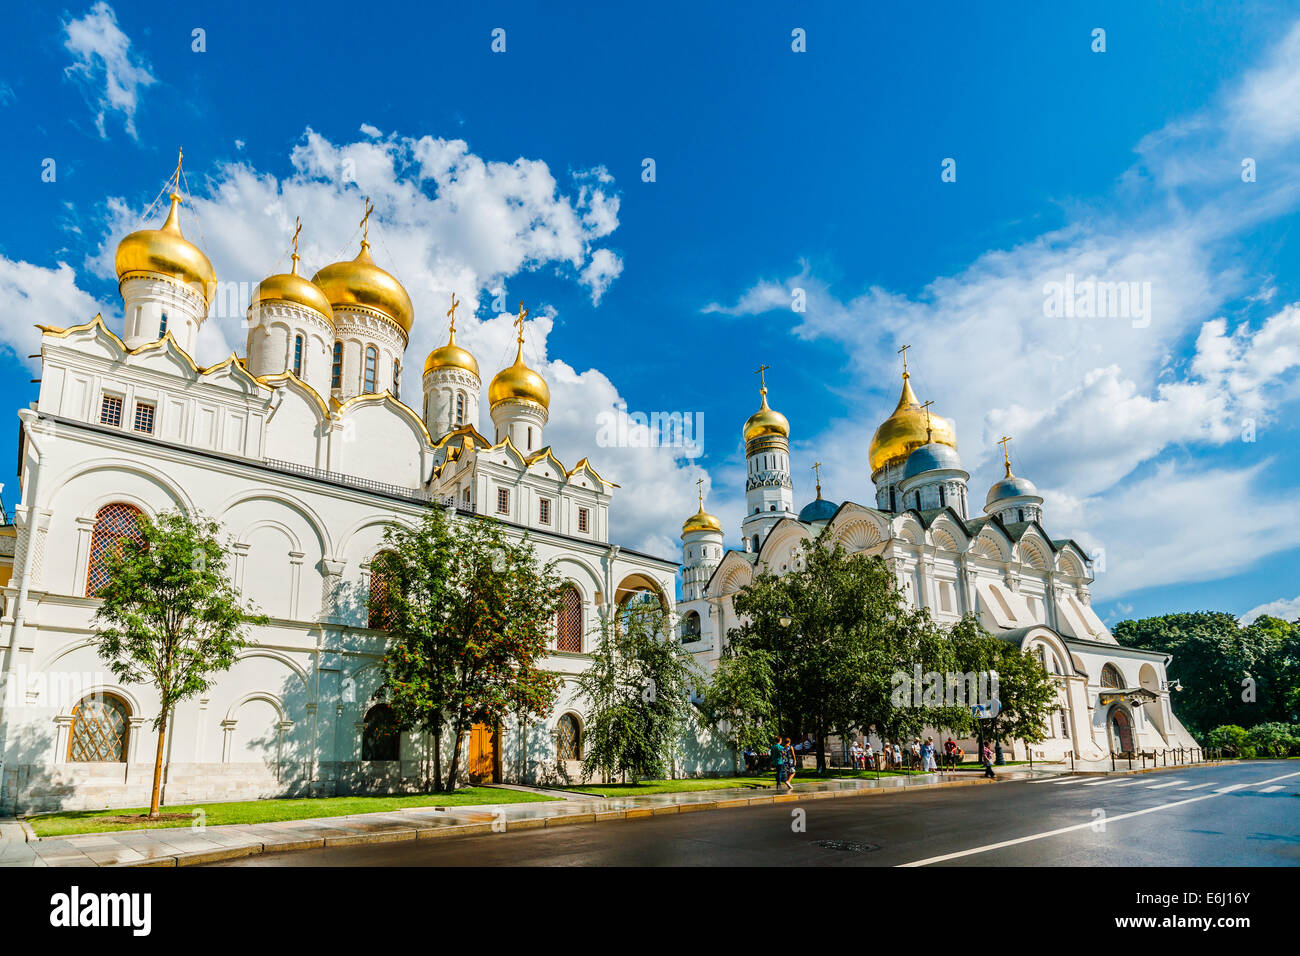 Moscow Kremlin Tour - 57. Annunciation (left) and Archangel (right) cathedrals of Moscow Kremlin Stock Photo